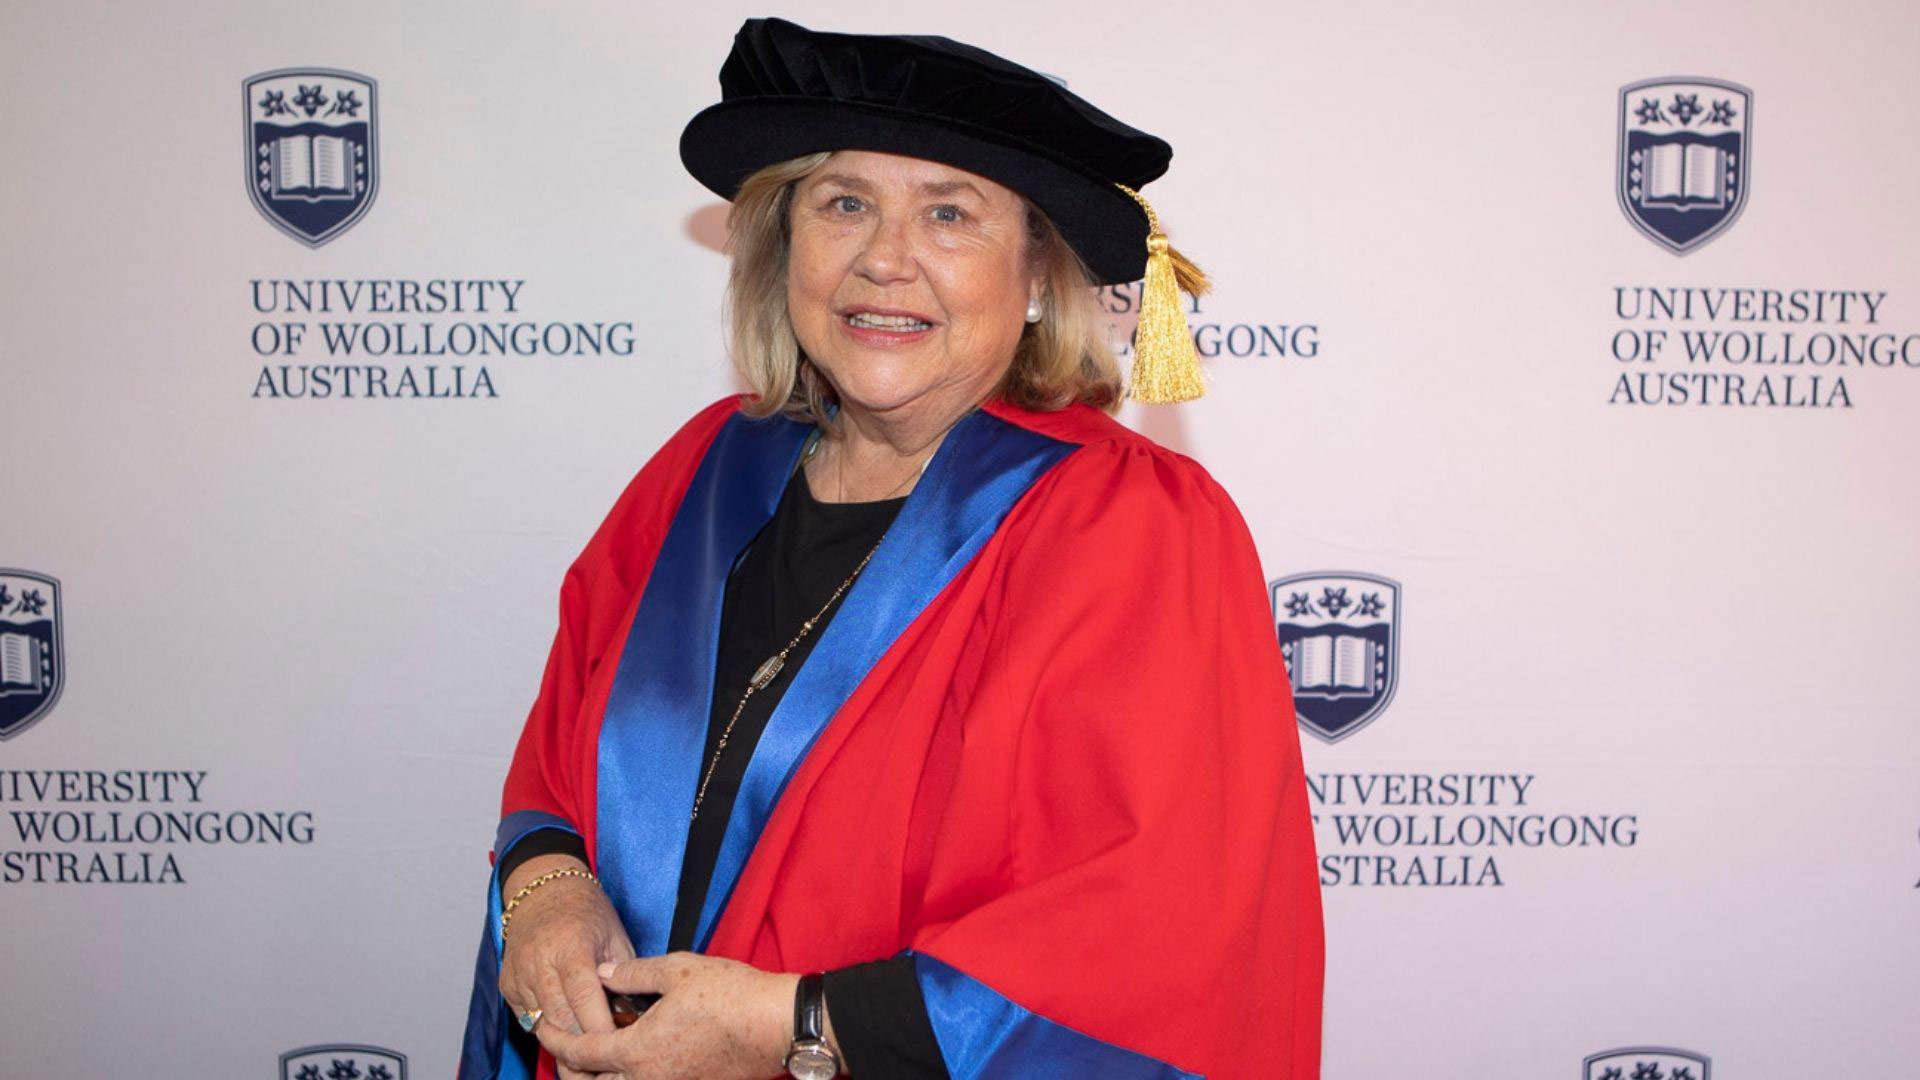 Kim McKay, pictured against a UOW wall, wearing her graduation gown and cap. Photo: Mark Newsham